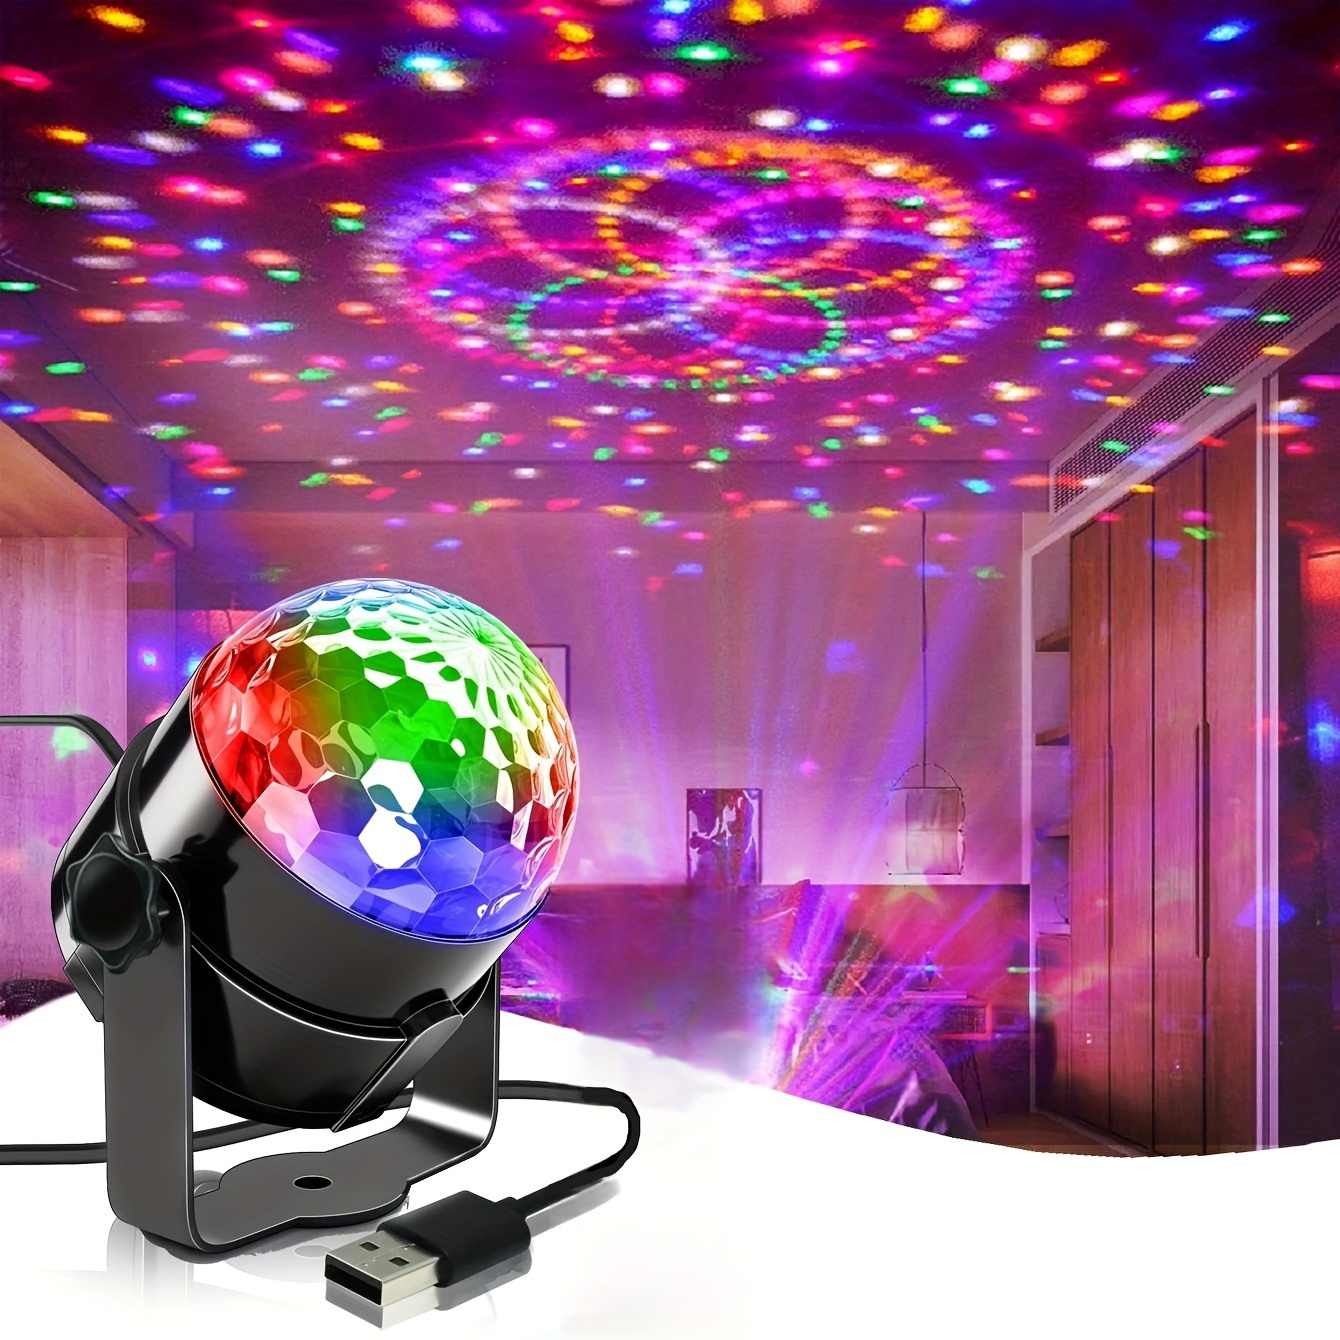 

Usb Powered Led Disco Ball Light – Color Changing Voice-controlled Rgb Magic Ball Projection Light For Parties, Christmas, Spring Festival, New Year's, Valentine's Day – Tabletop Light Without Battery